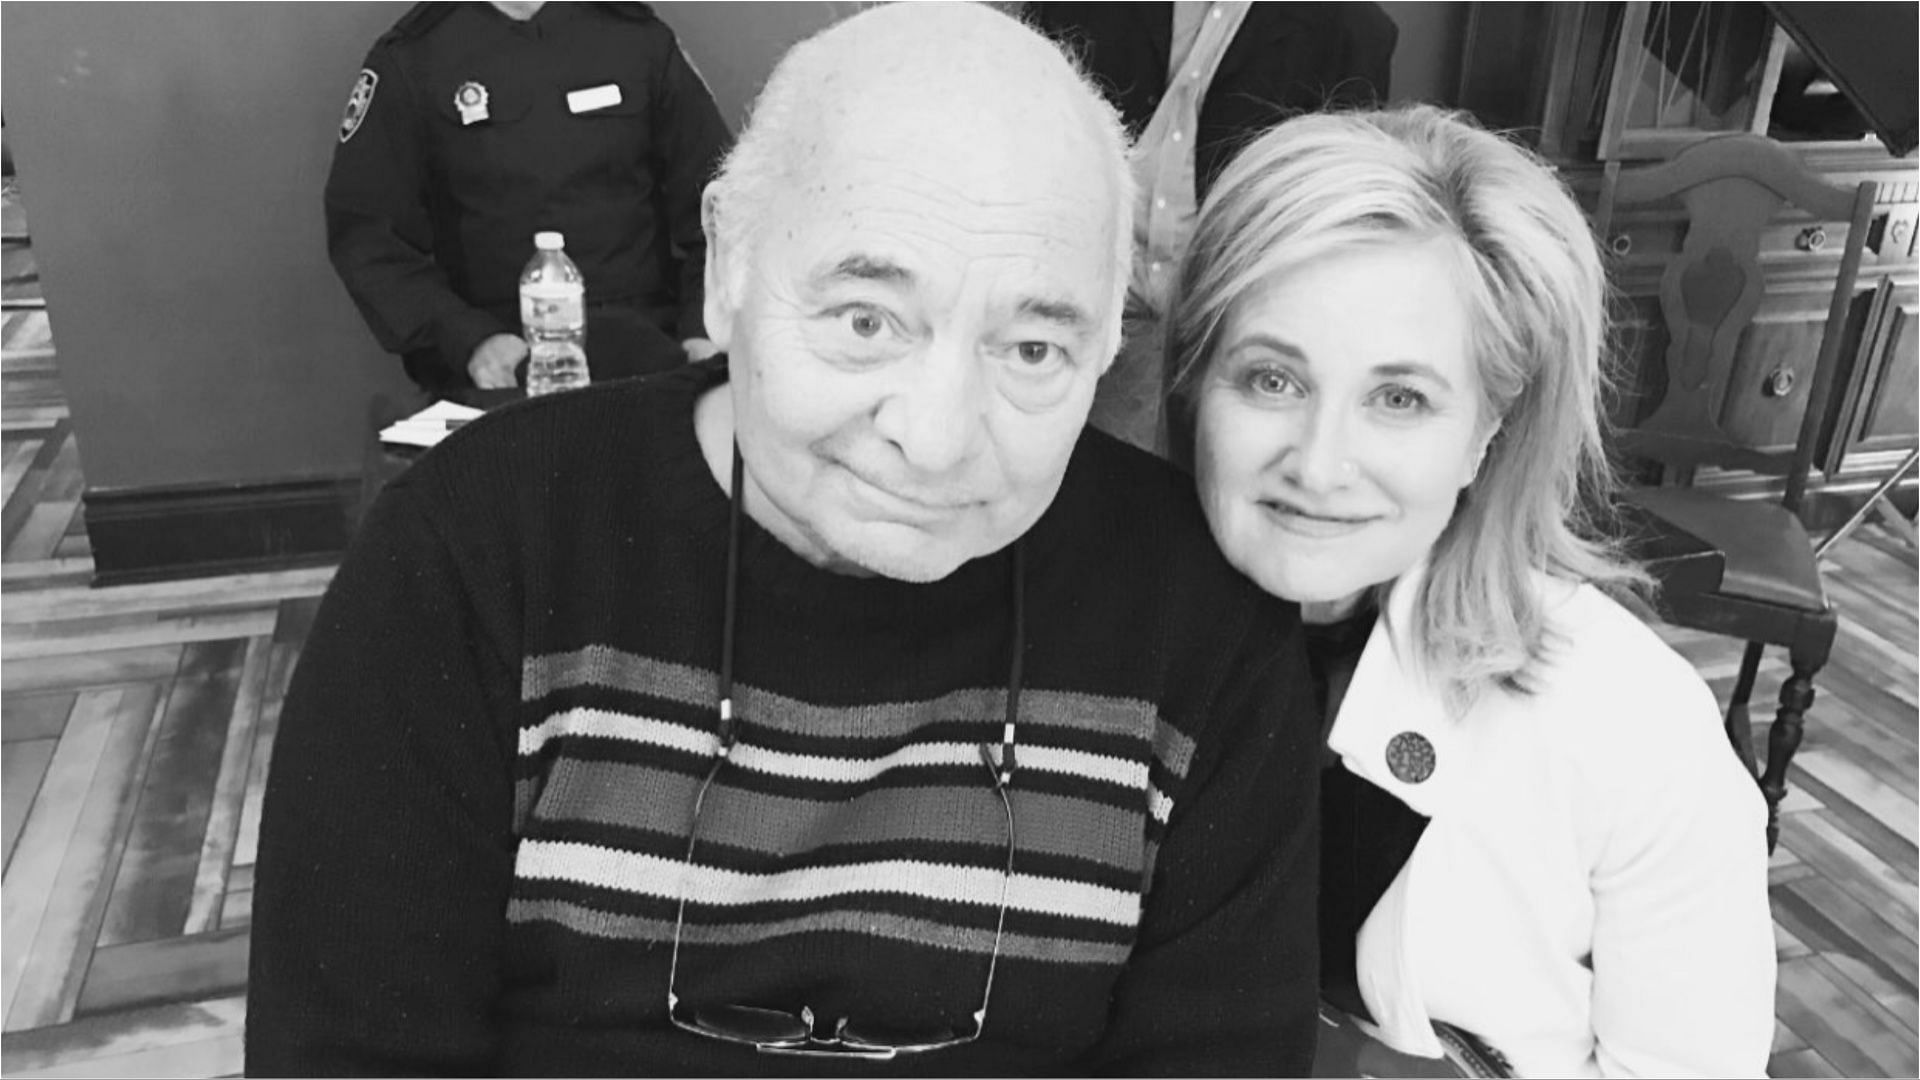 Burt Young was known for his performance in The Sopranos (Image via MoMcCormick7/X)